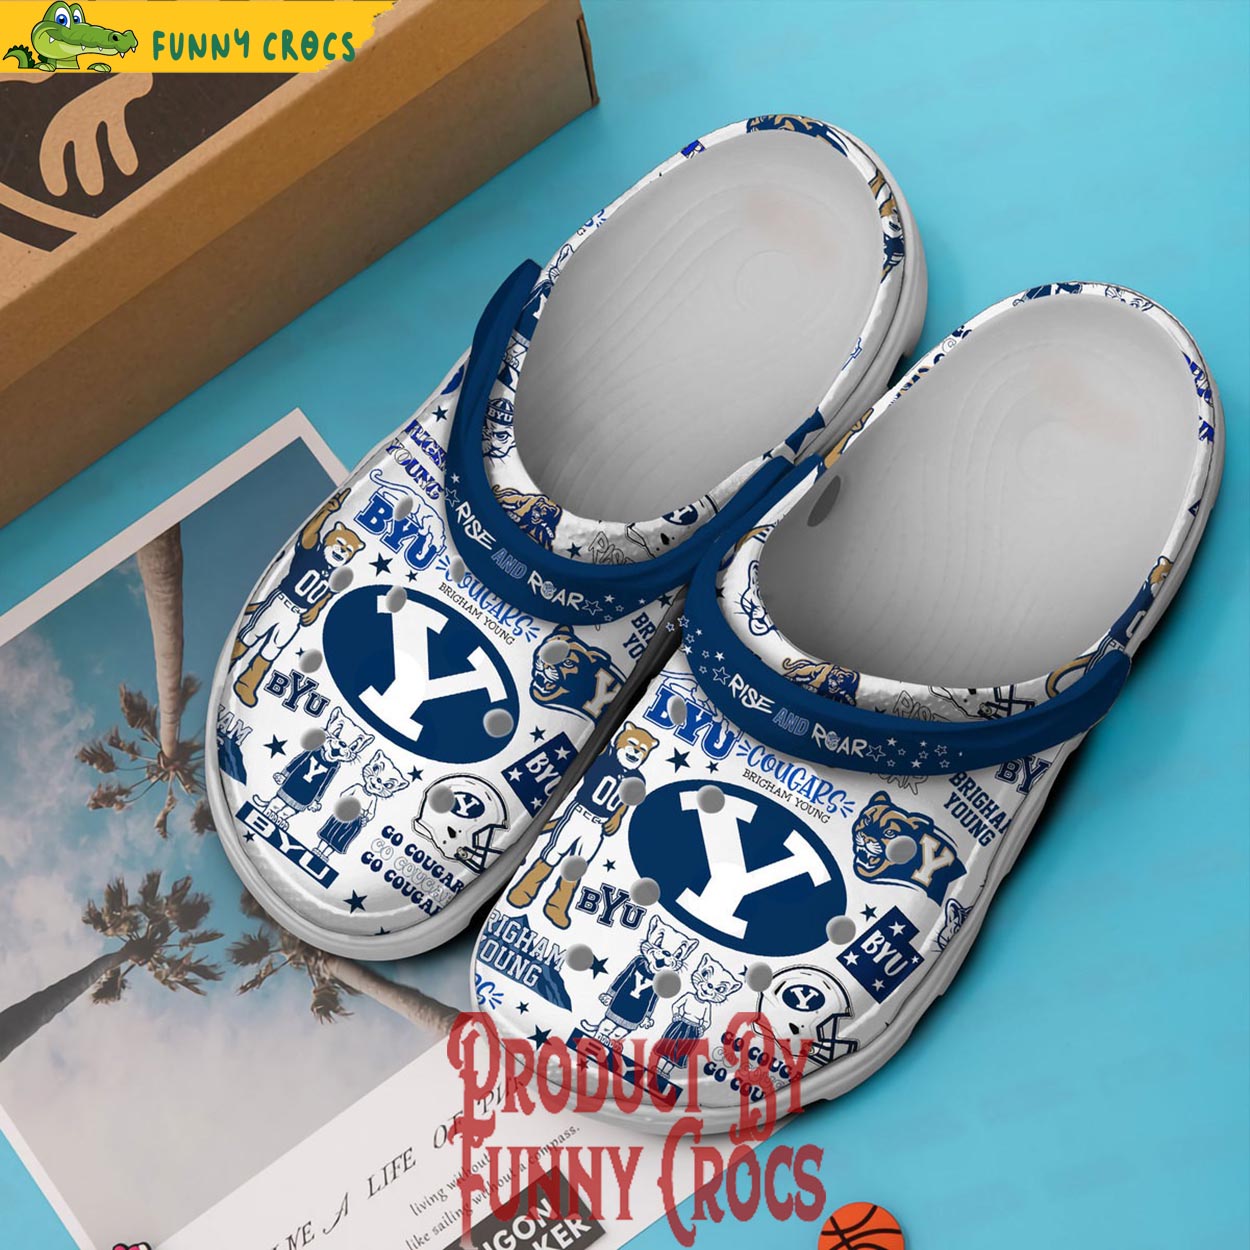 Byu Cougars Crocs Shoes - Discover Comfort And Style Clog Shoes With ...